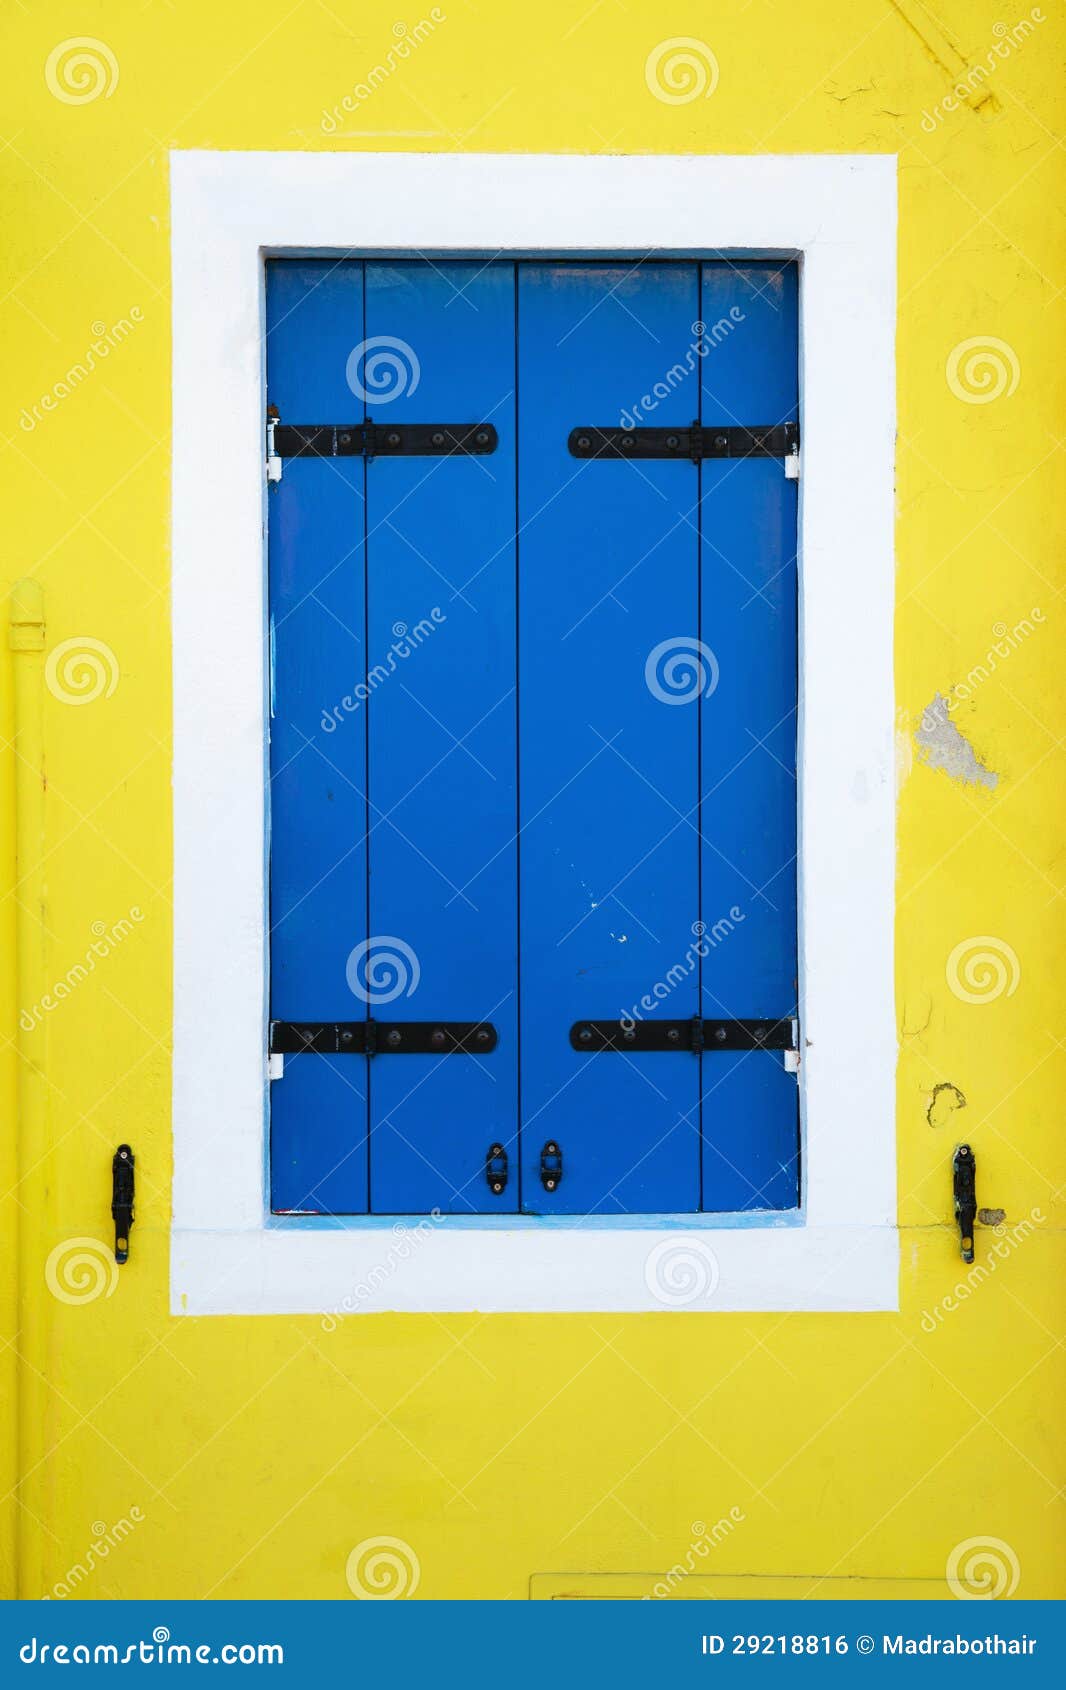 Blue Window Shutters On A Yellow House Wall Royalty Free Stock ...